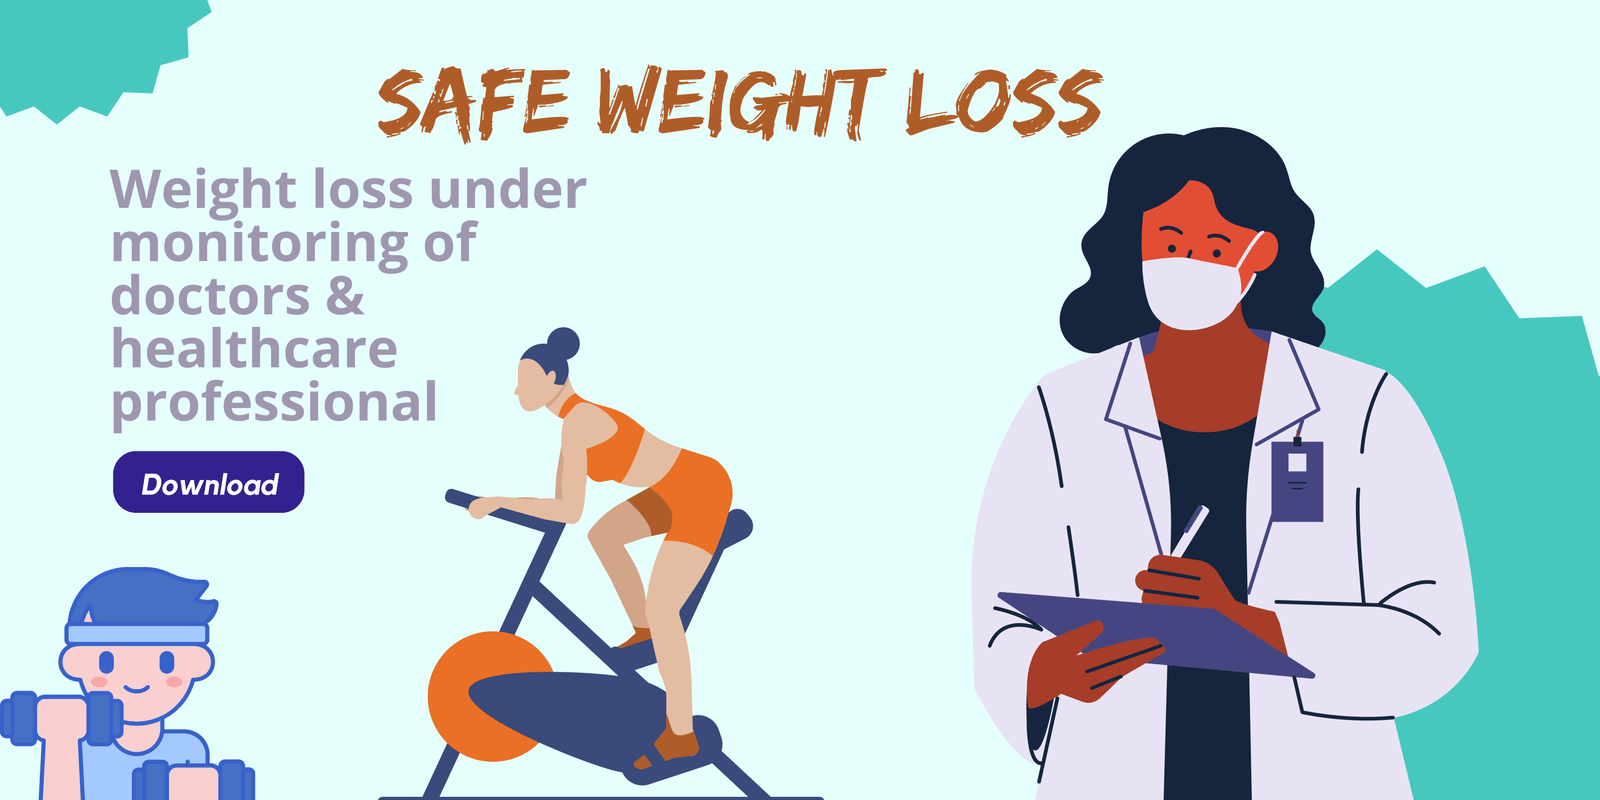 A Practical Guide to Safe Weight Loss: Achievable Daily Targets and Effective Strategies